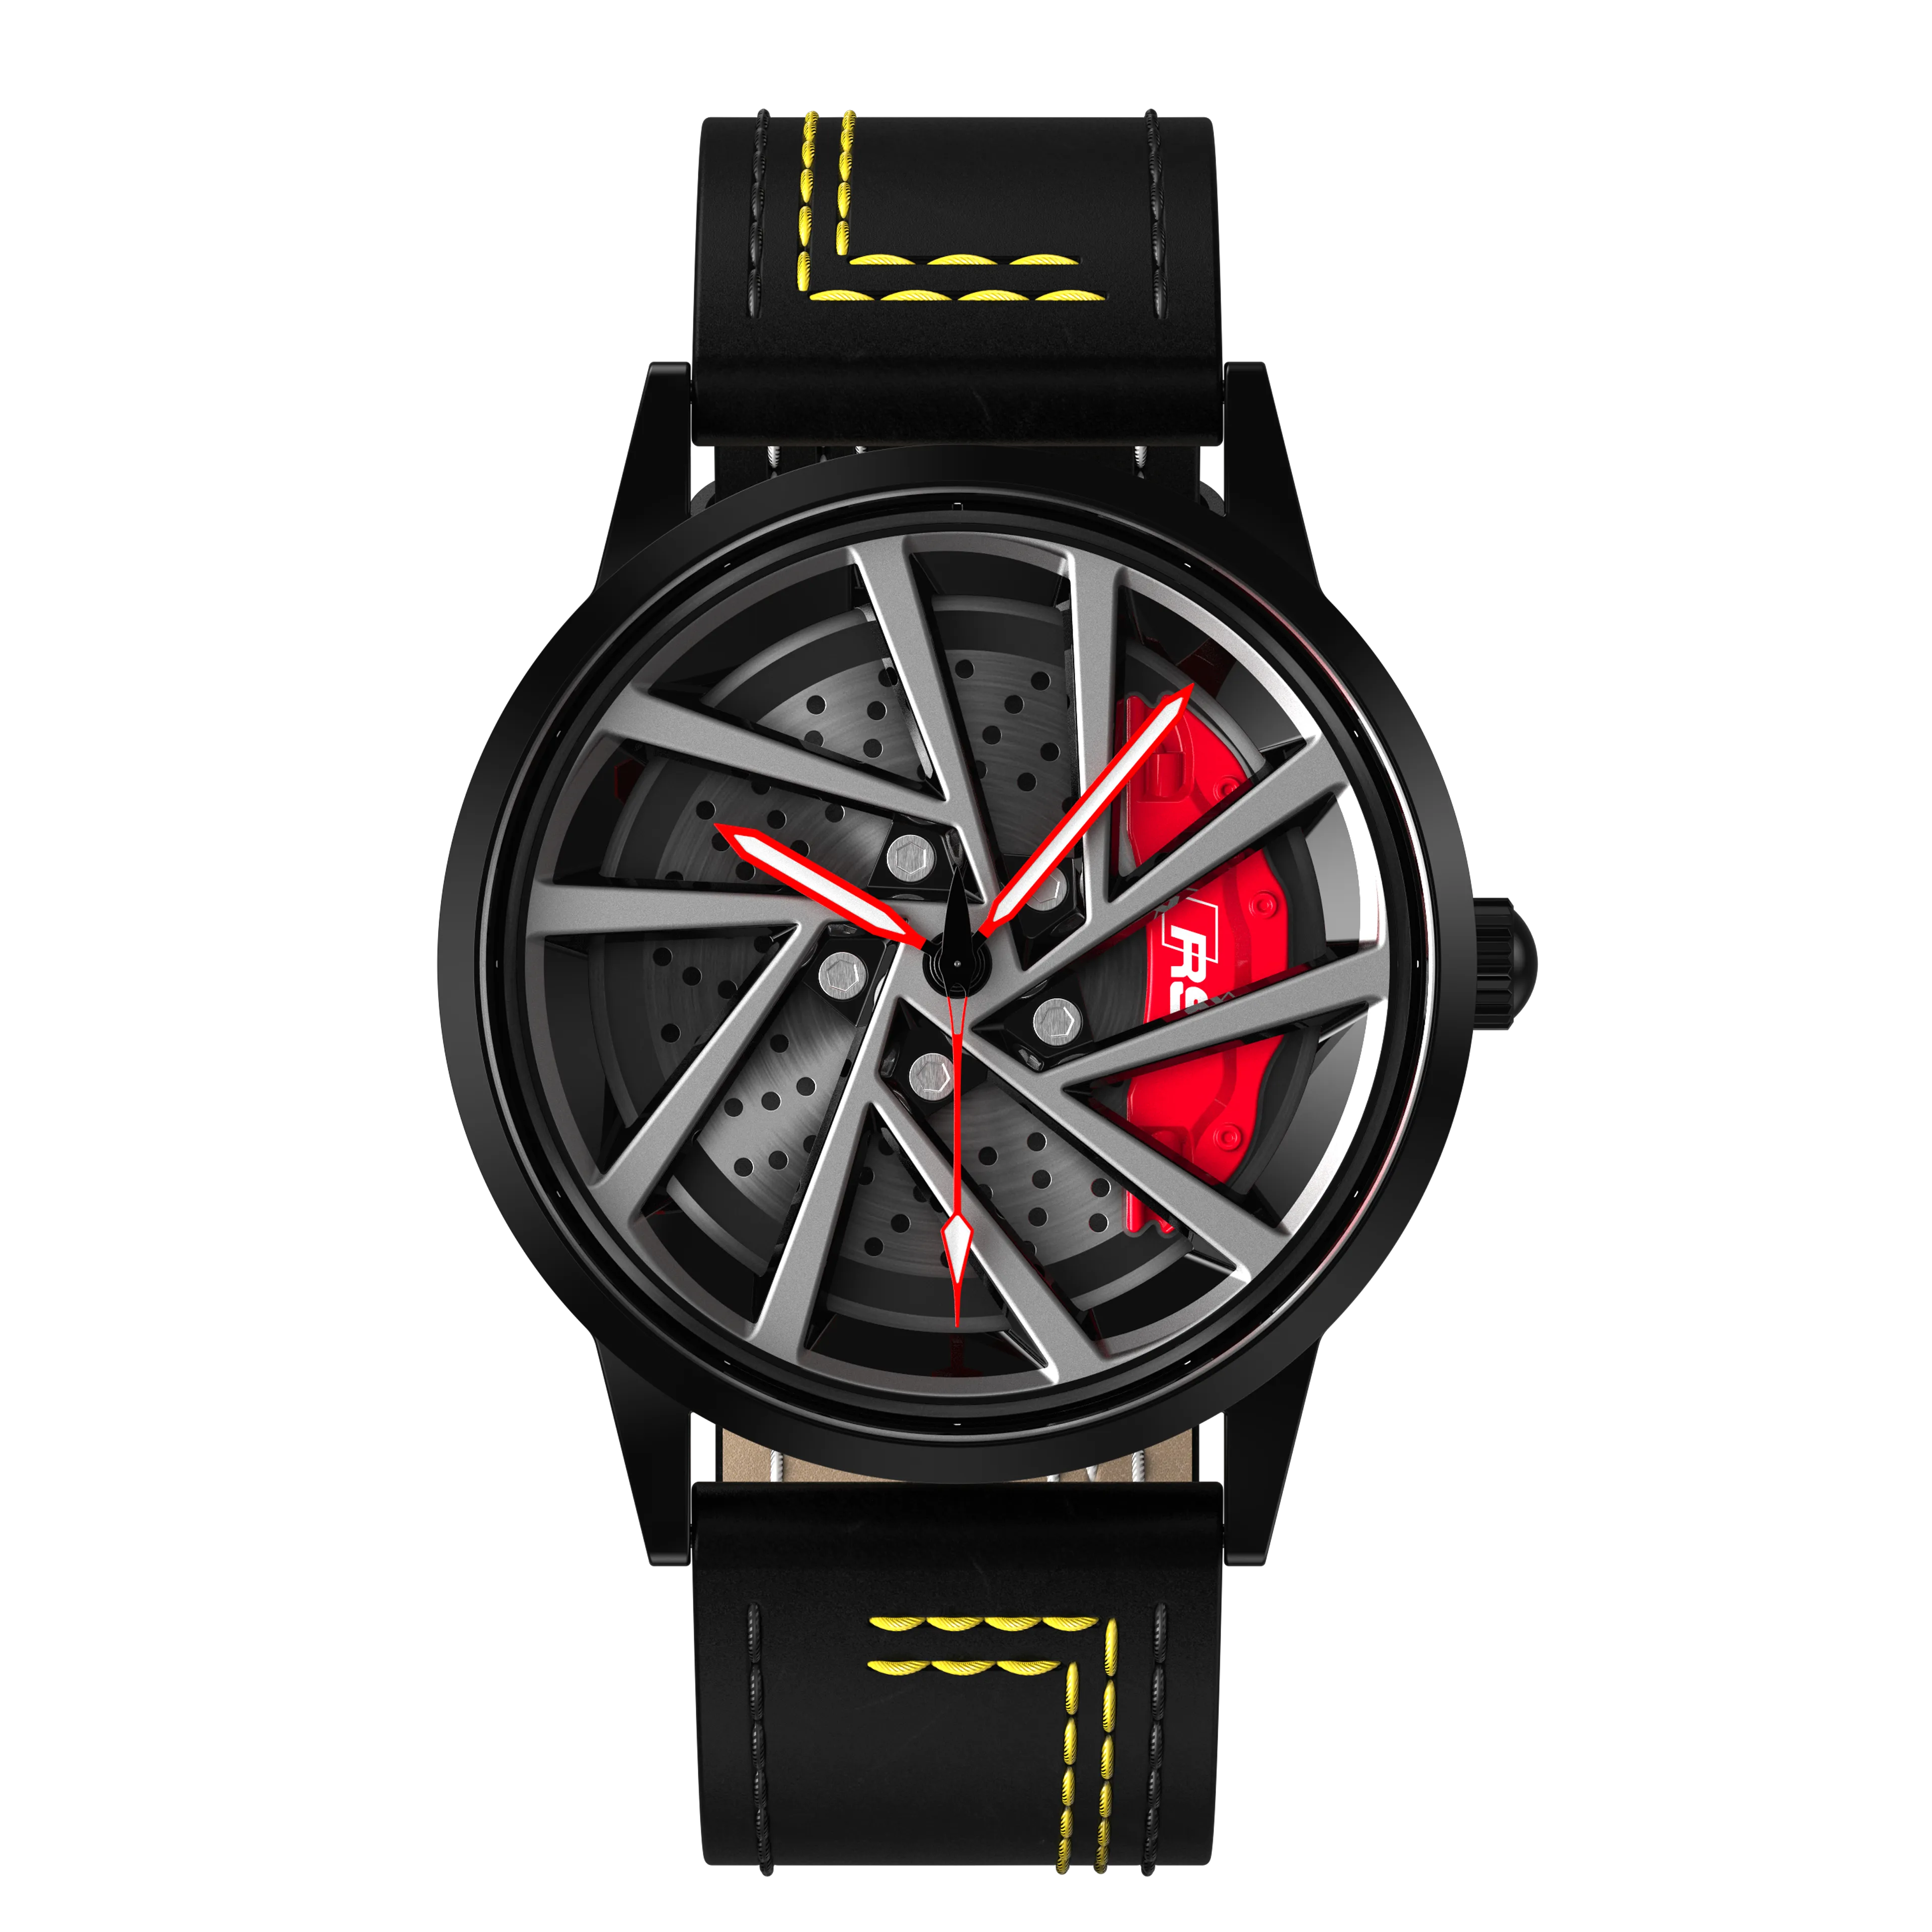 Shop Red Vorsprung RS5 Gyro - Yellow Leather Strap | RS Chrono